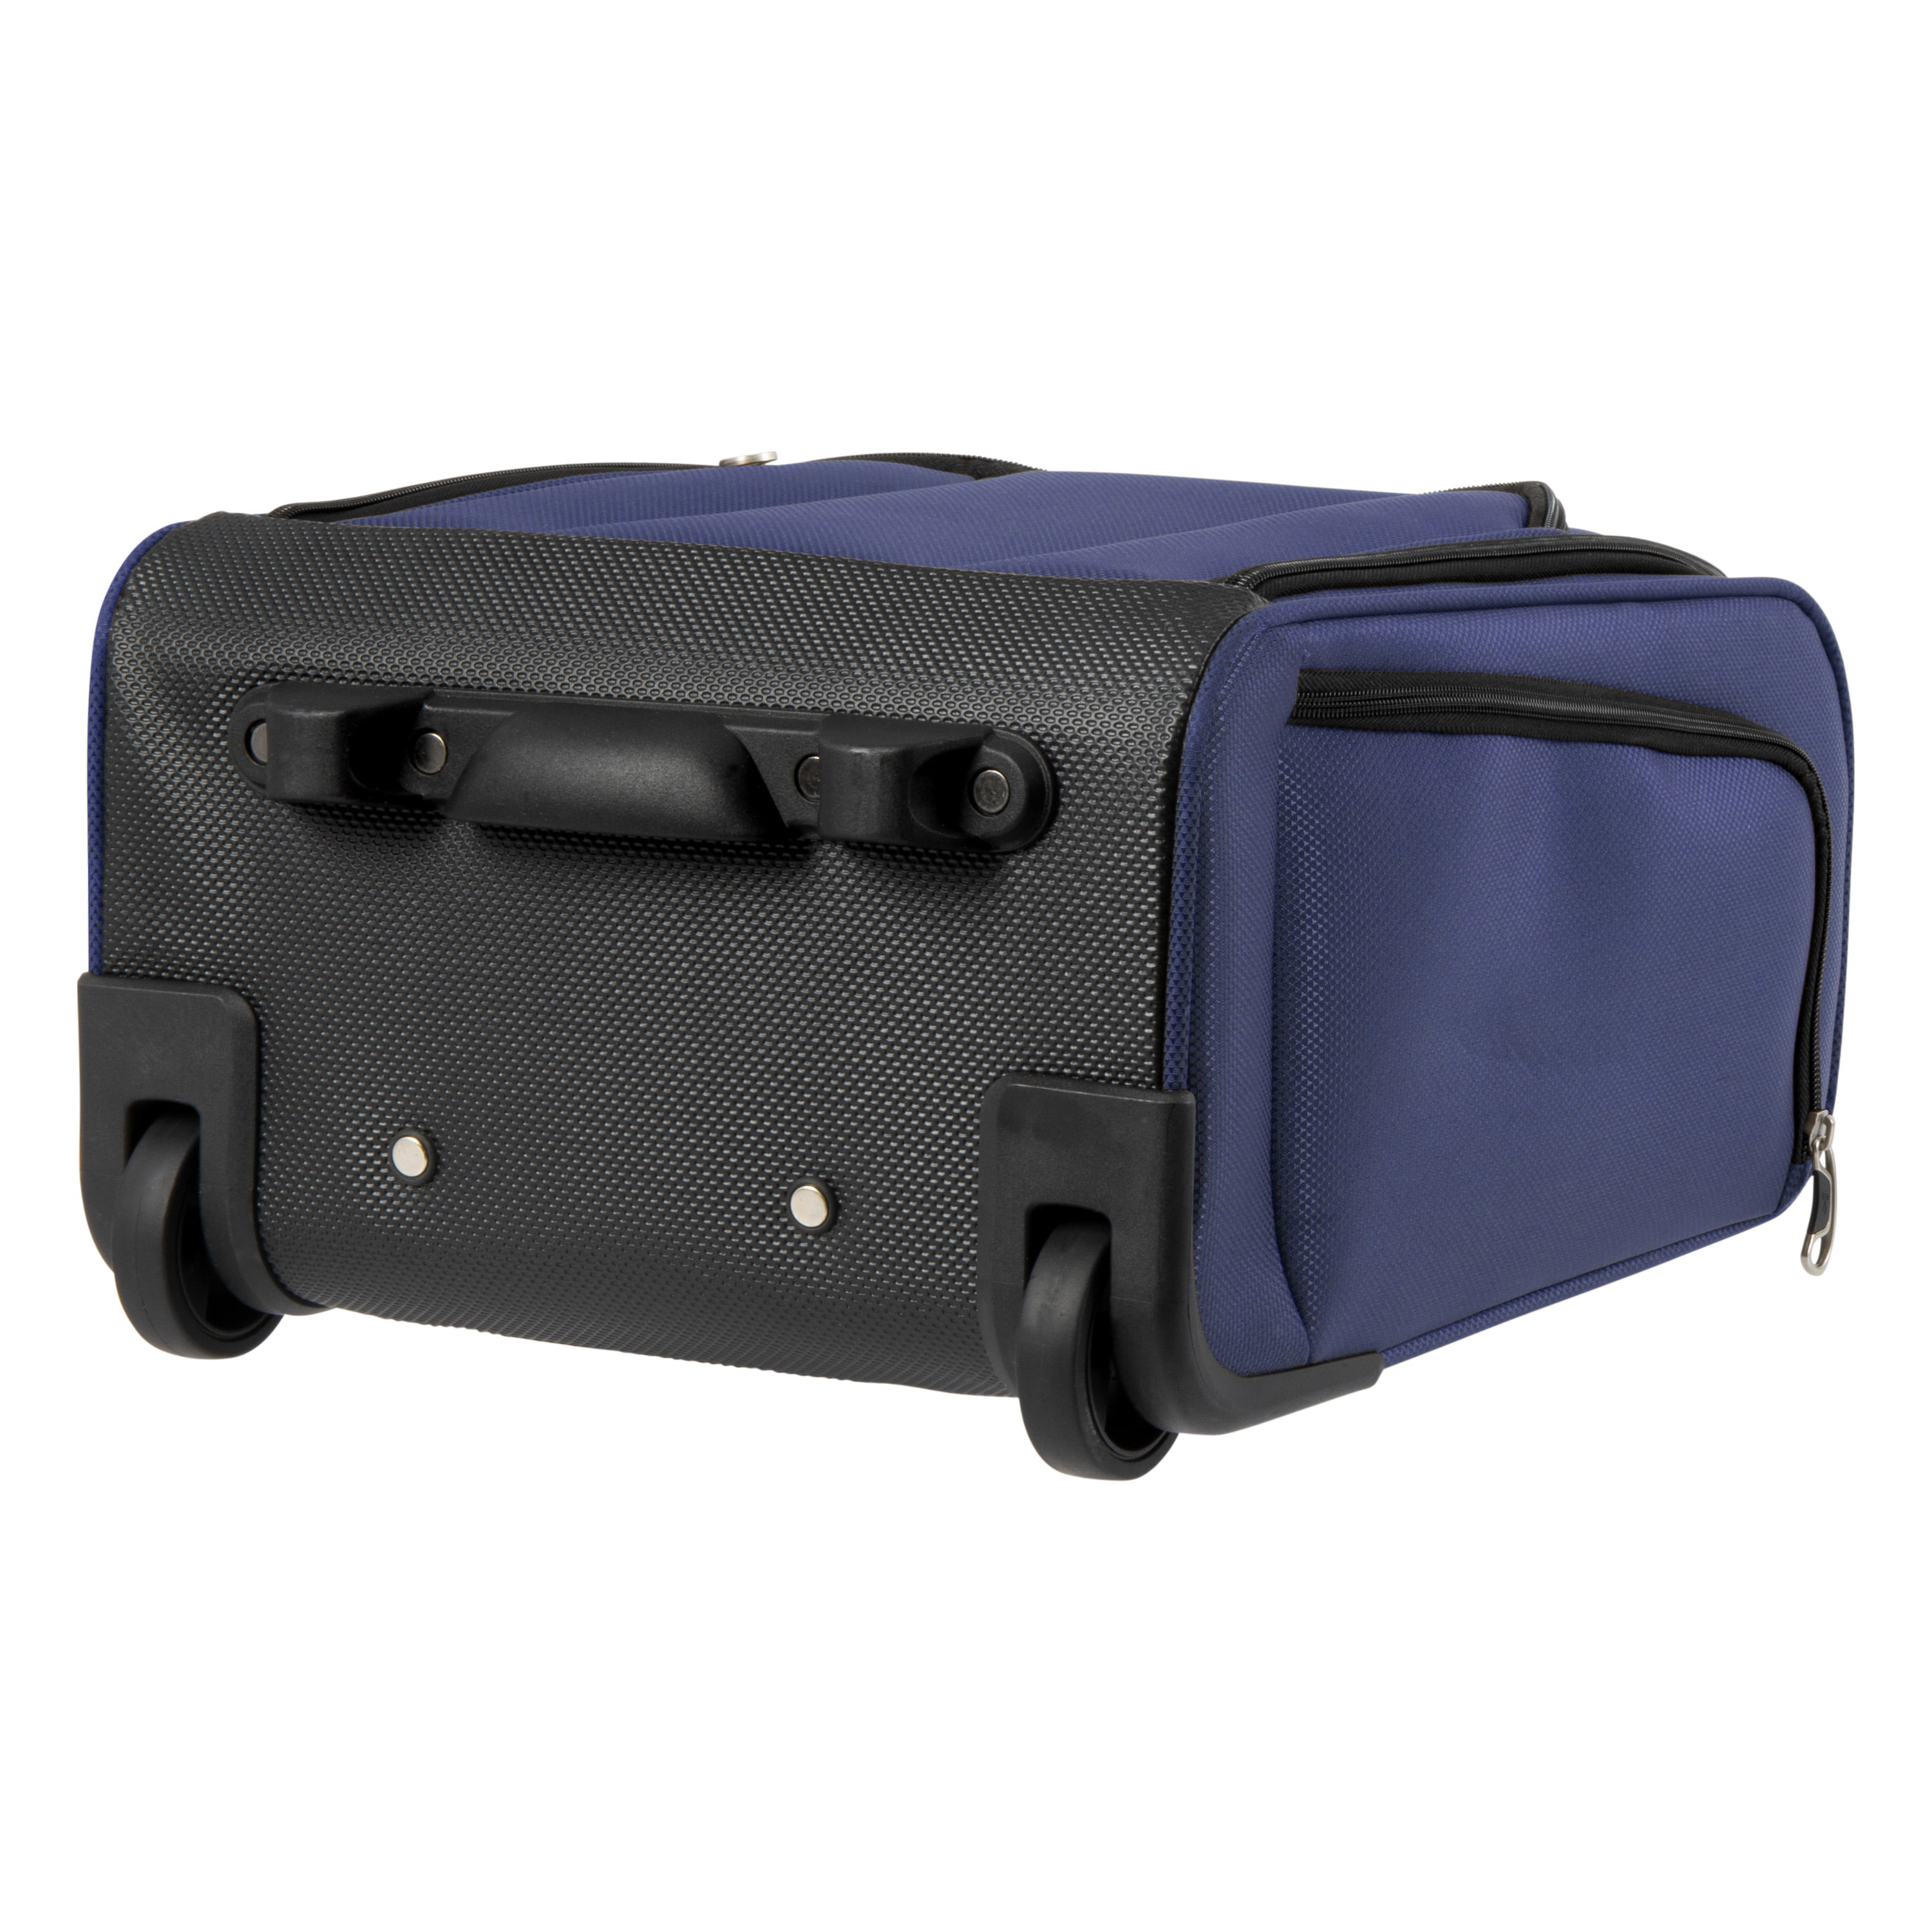 Tumi hardside luggage is on sale on : Save $206 on a new carry-on